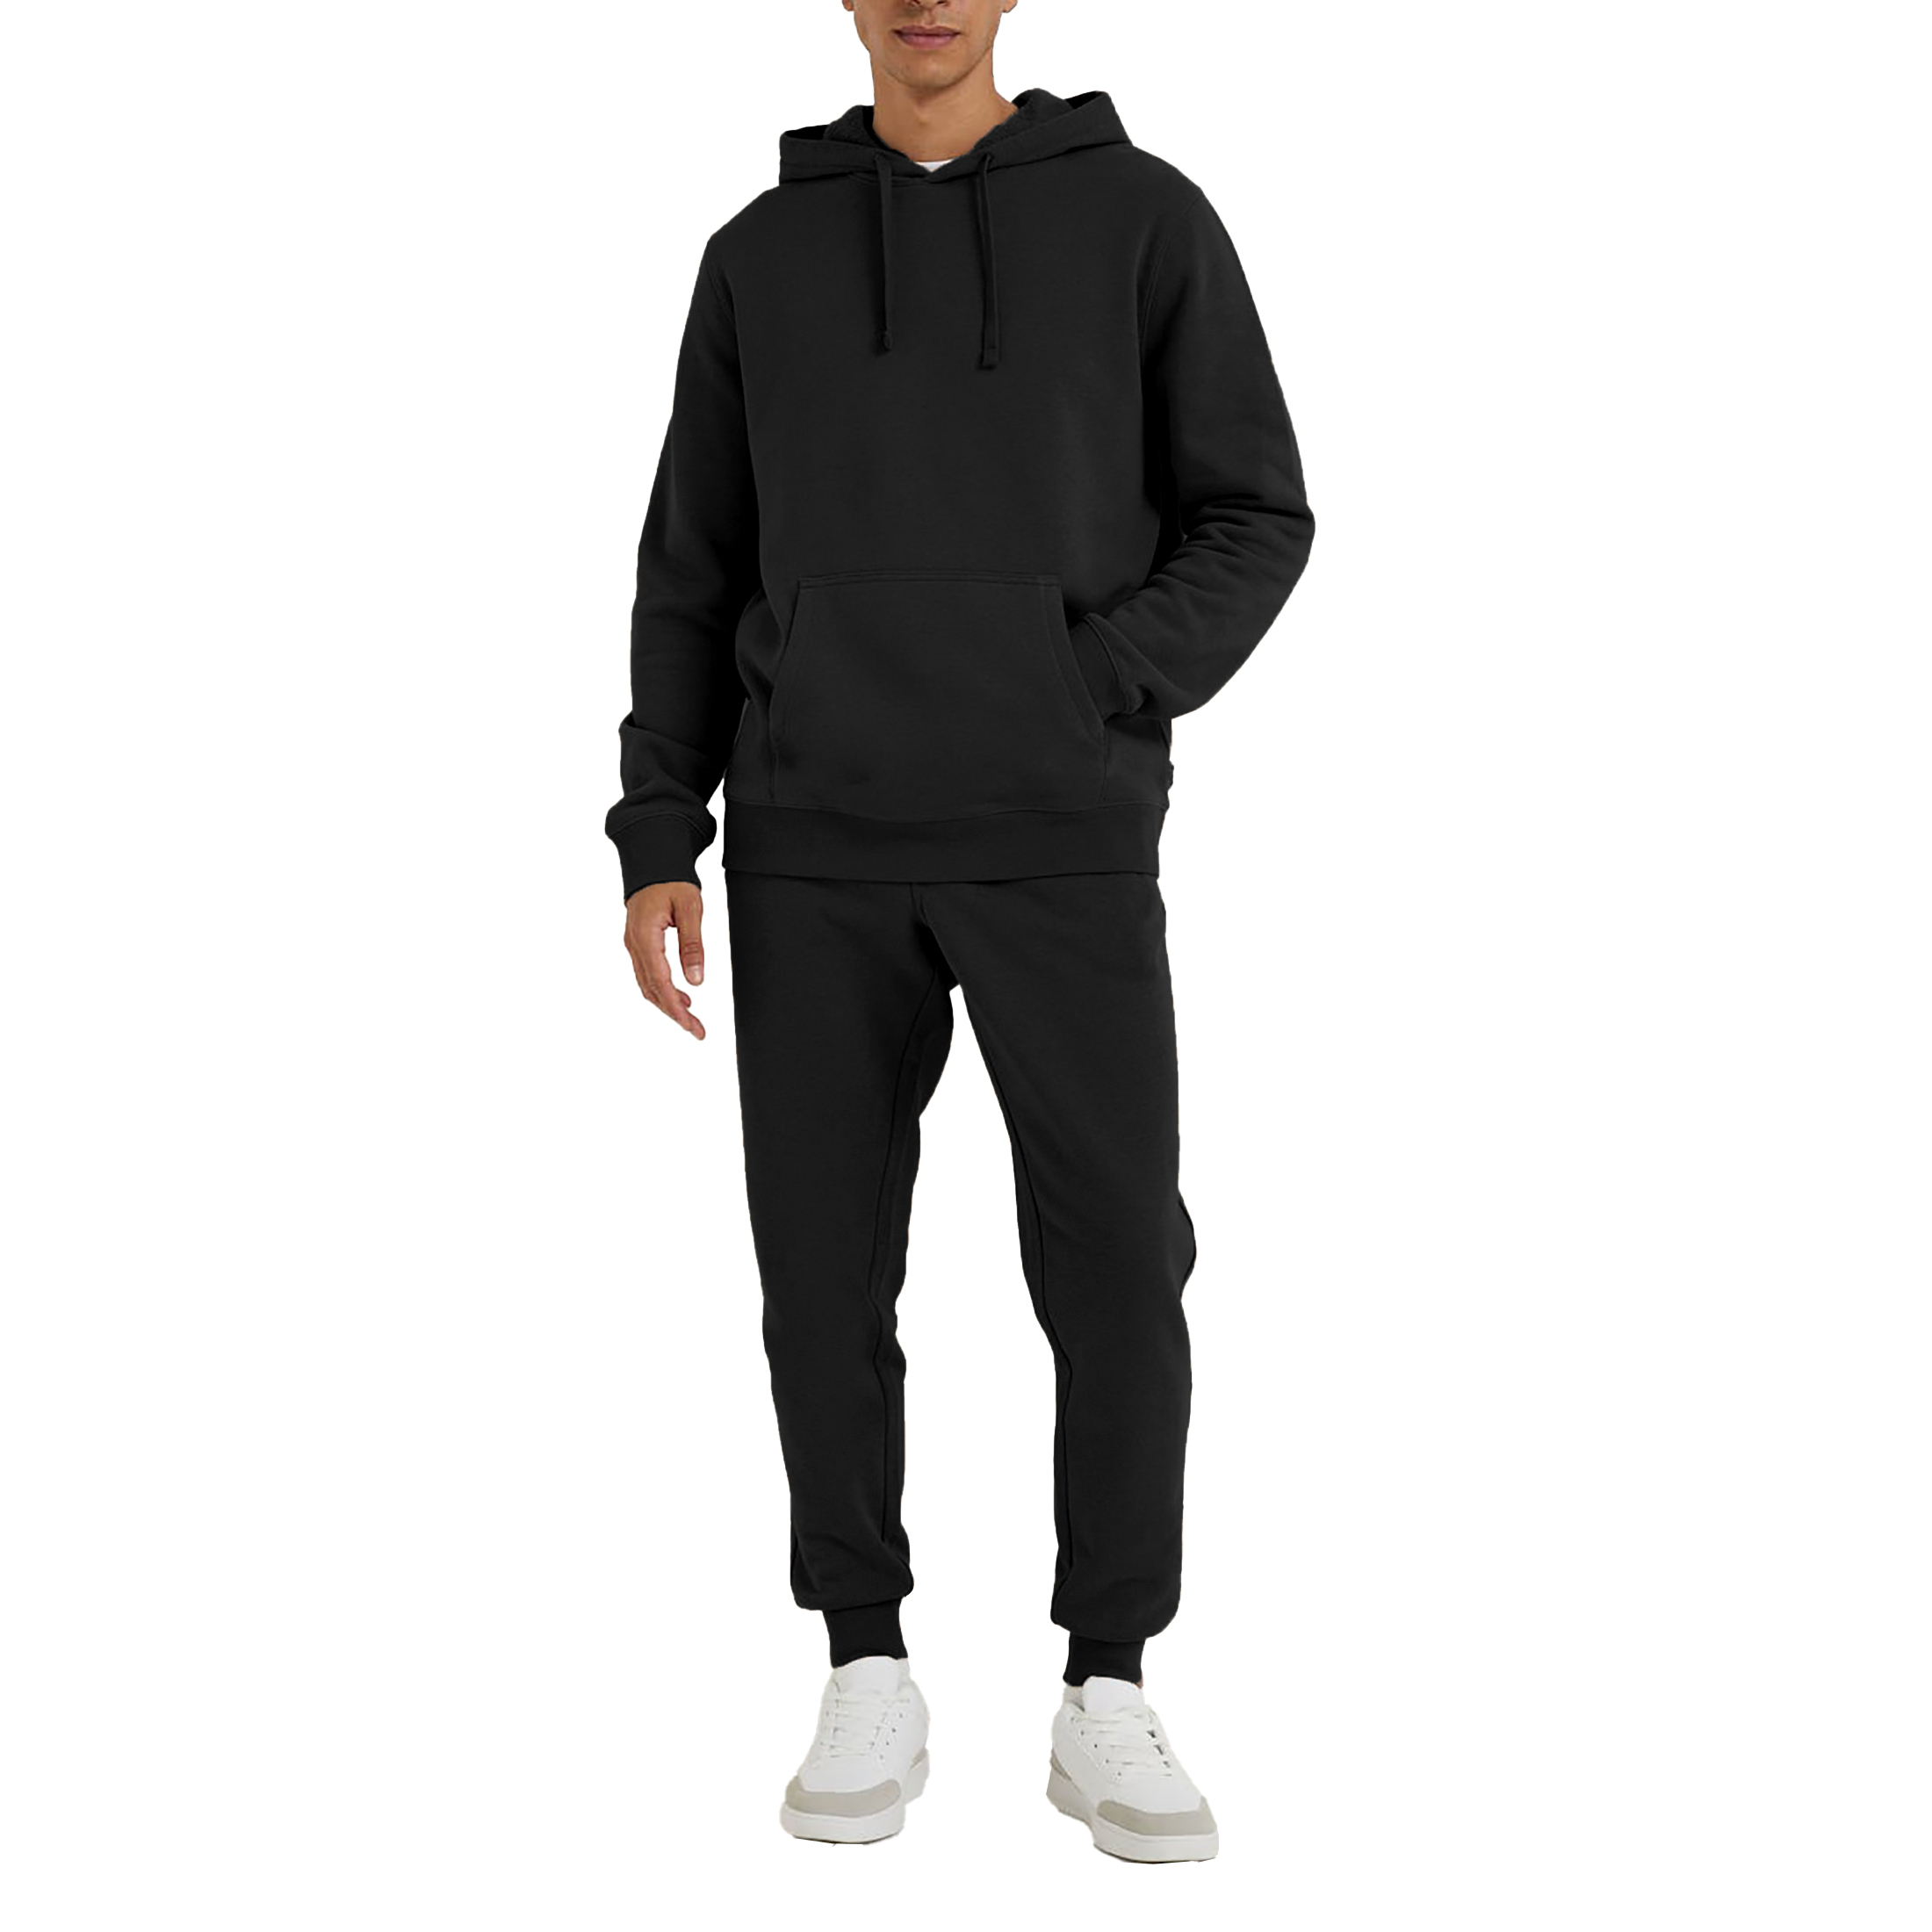 Men's Athletic Warm Jogging Pullover Active Tracksuit - Black, Small